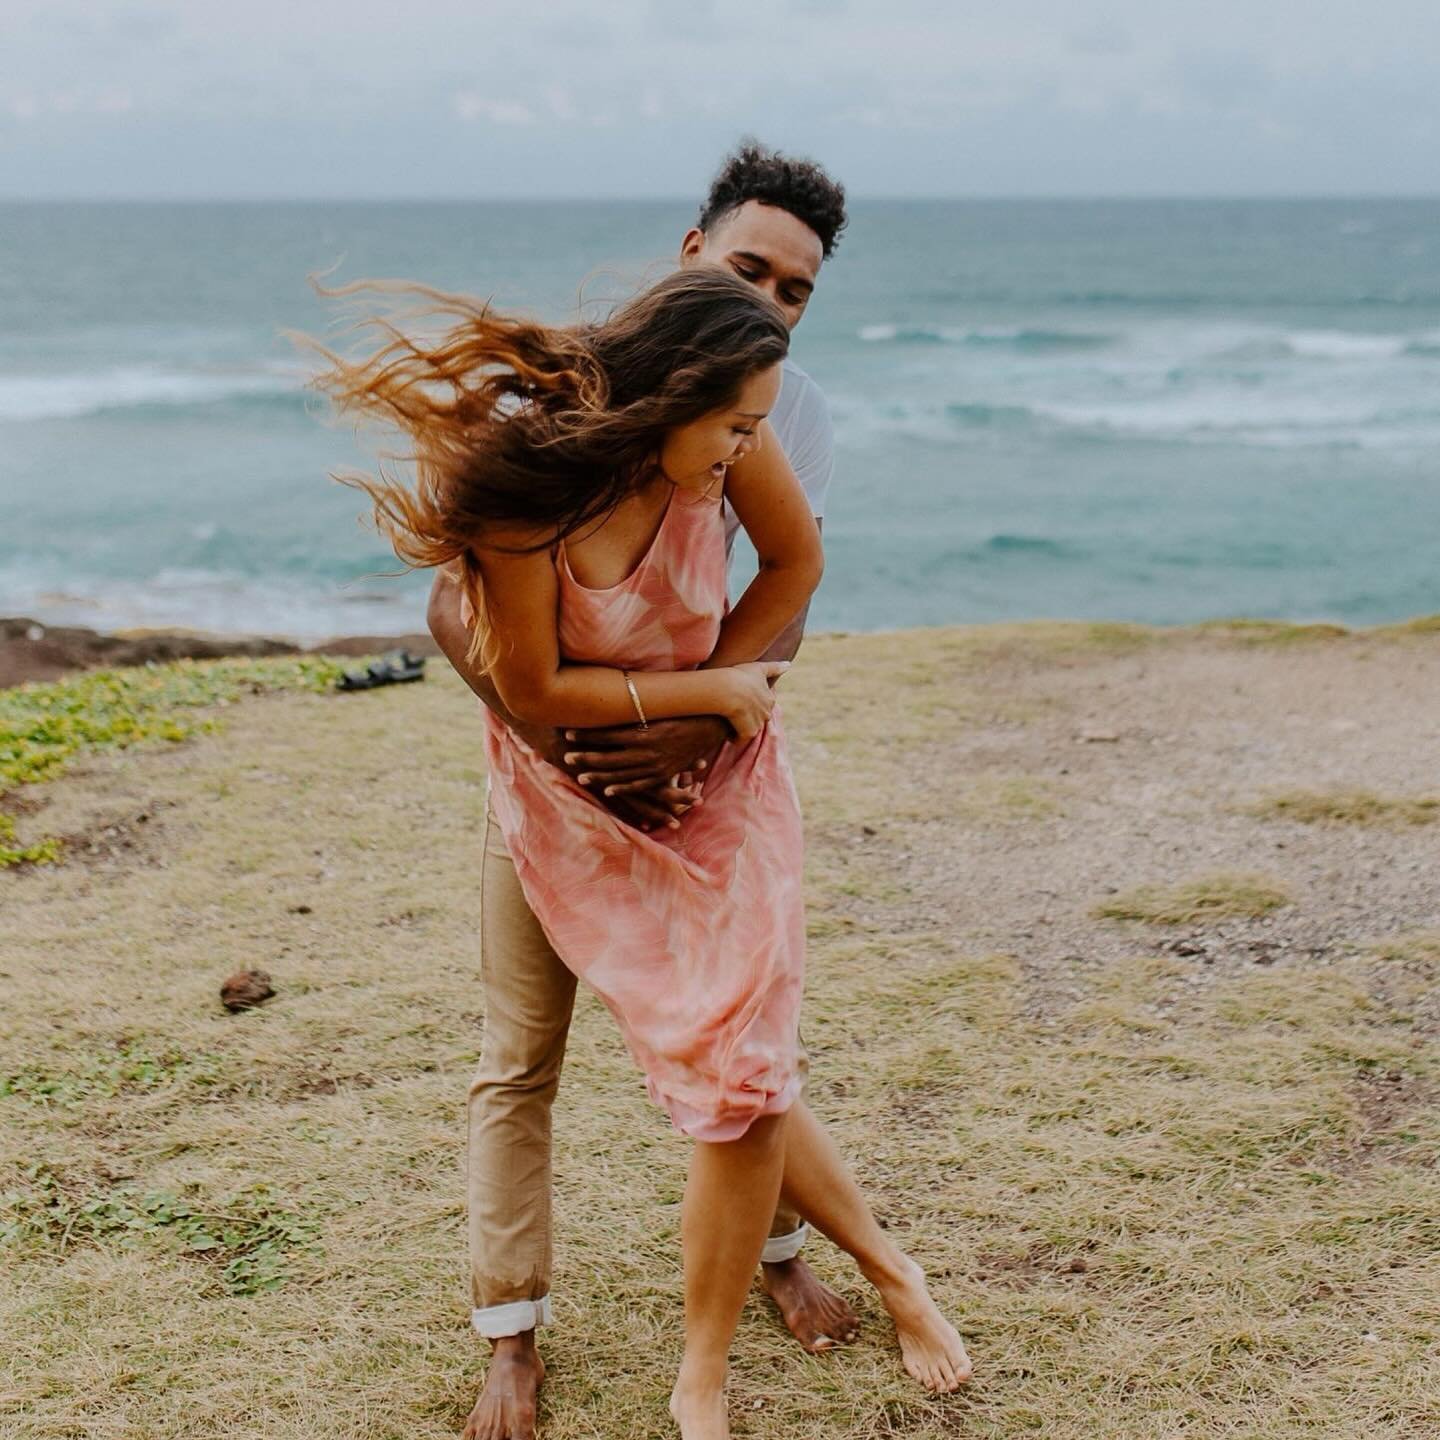 I&rsquo;m still dizzy from this windy session on the cliffs of the west shores of Oahu. I found this location after driving around aimlessly and came to the end of the road. The cliffs reminded me of Ireland and the lush mountains behind us felt ethe